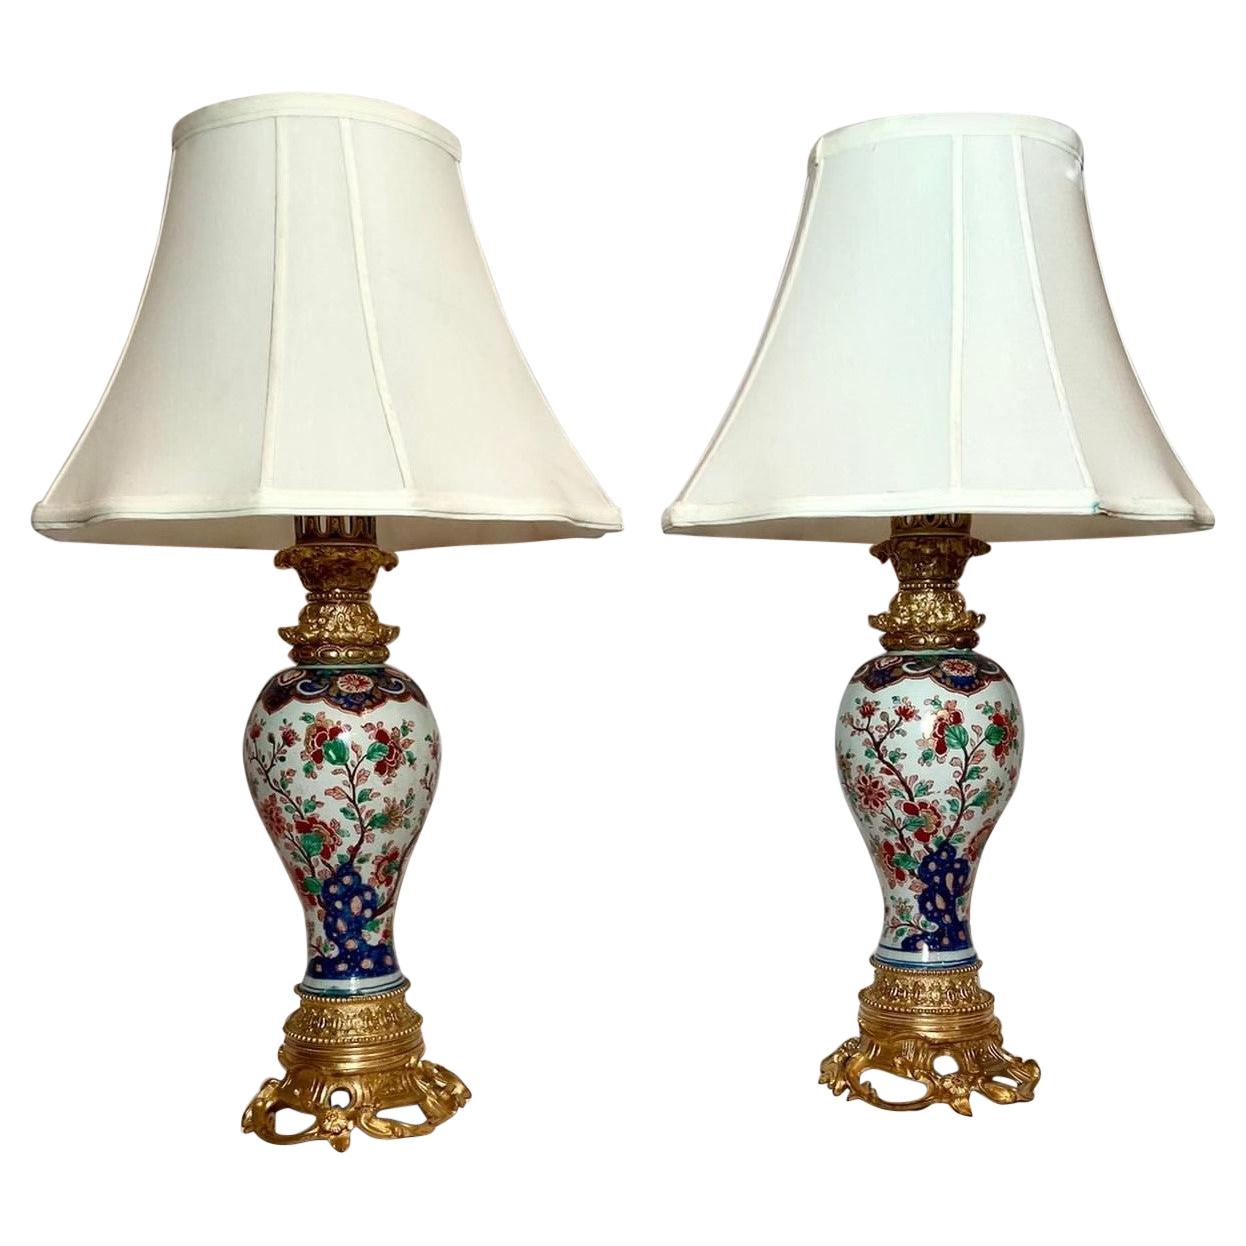 Pair of Antique Early 19th Century Ormolu Mounted Imari Porcelain Urn Lamps